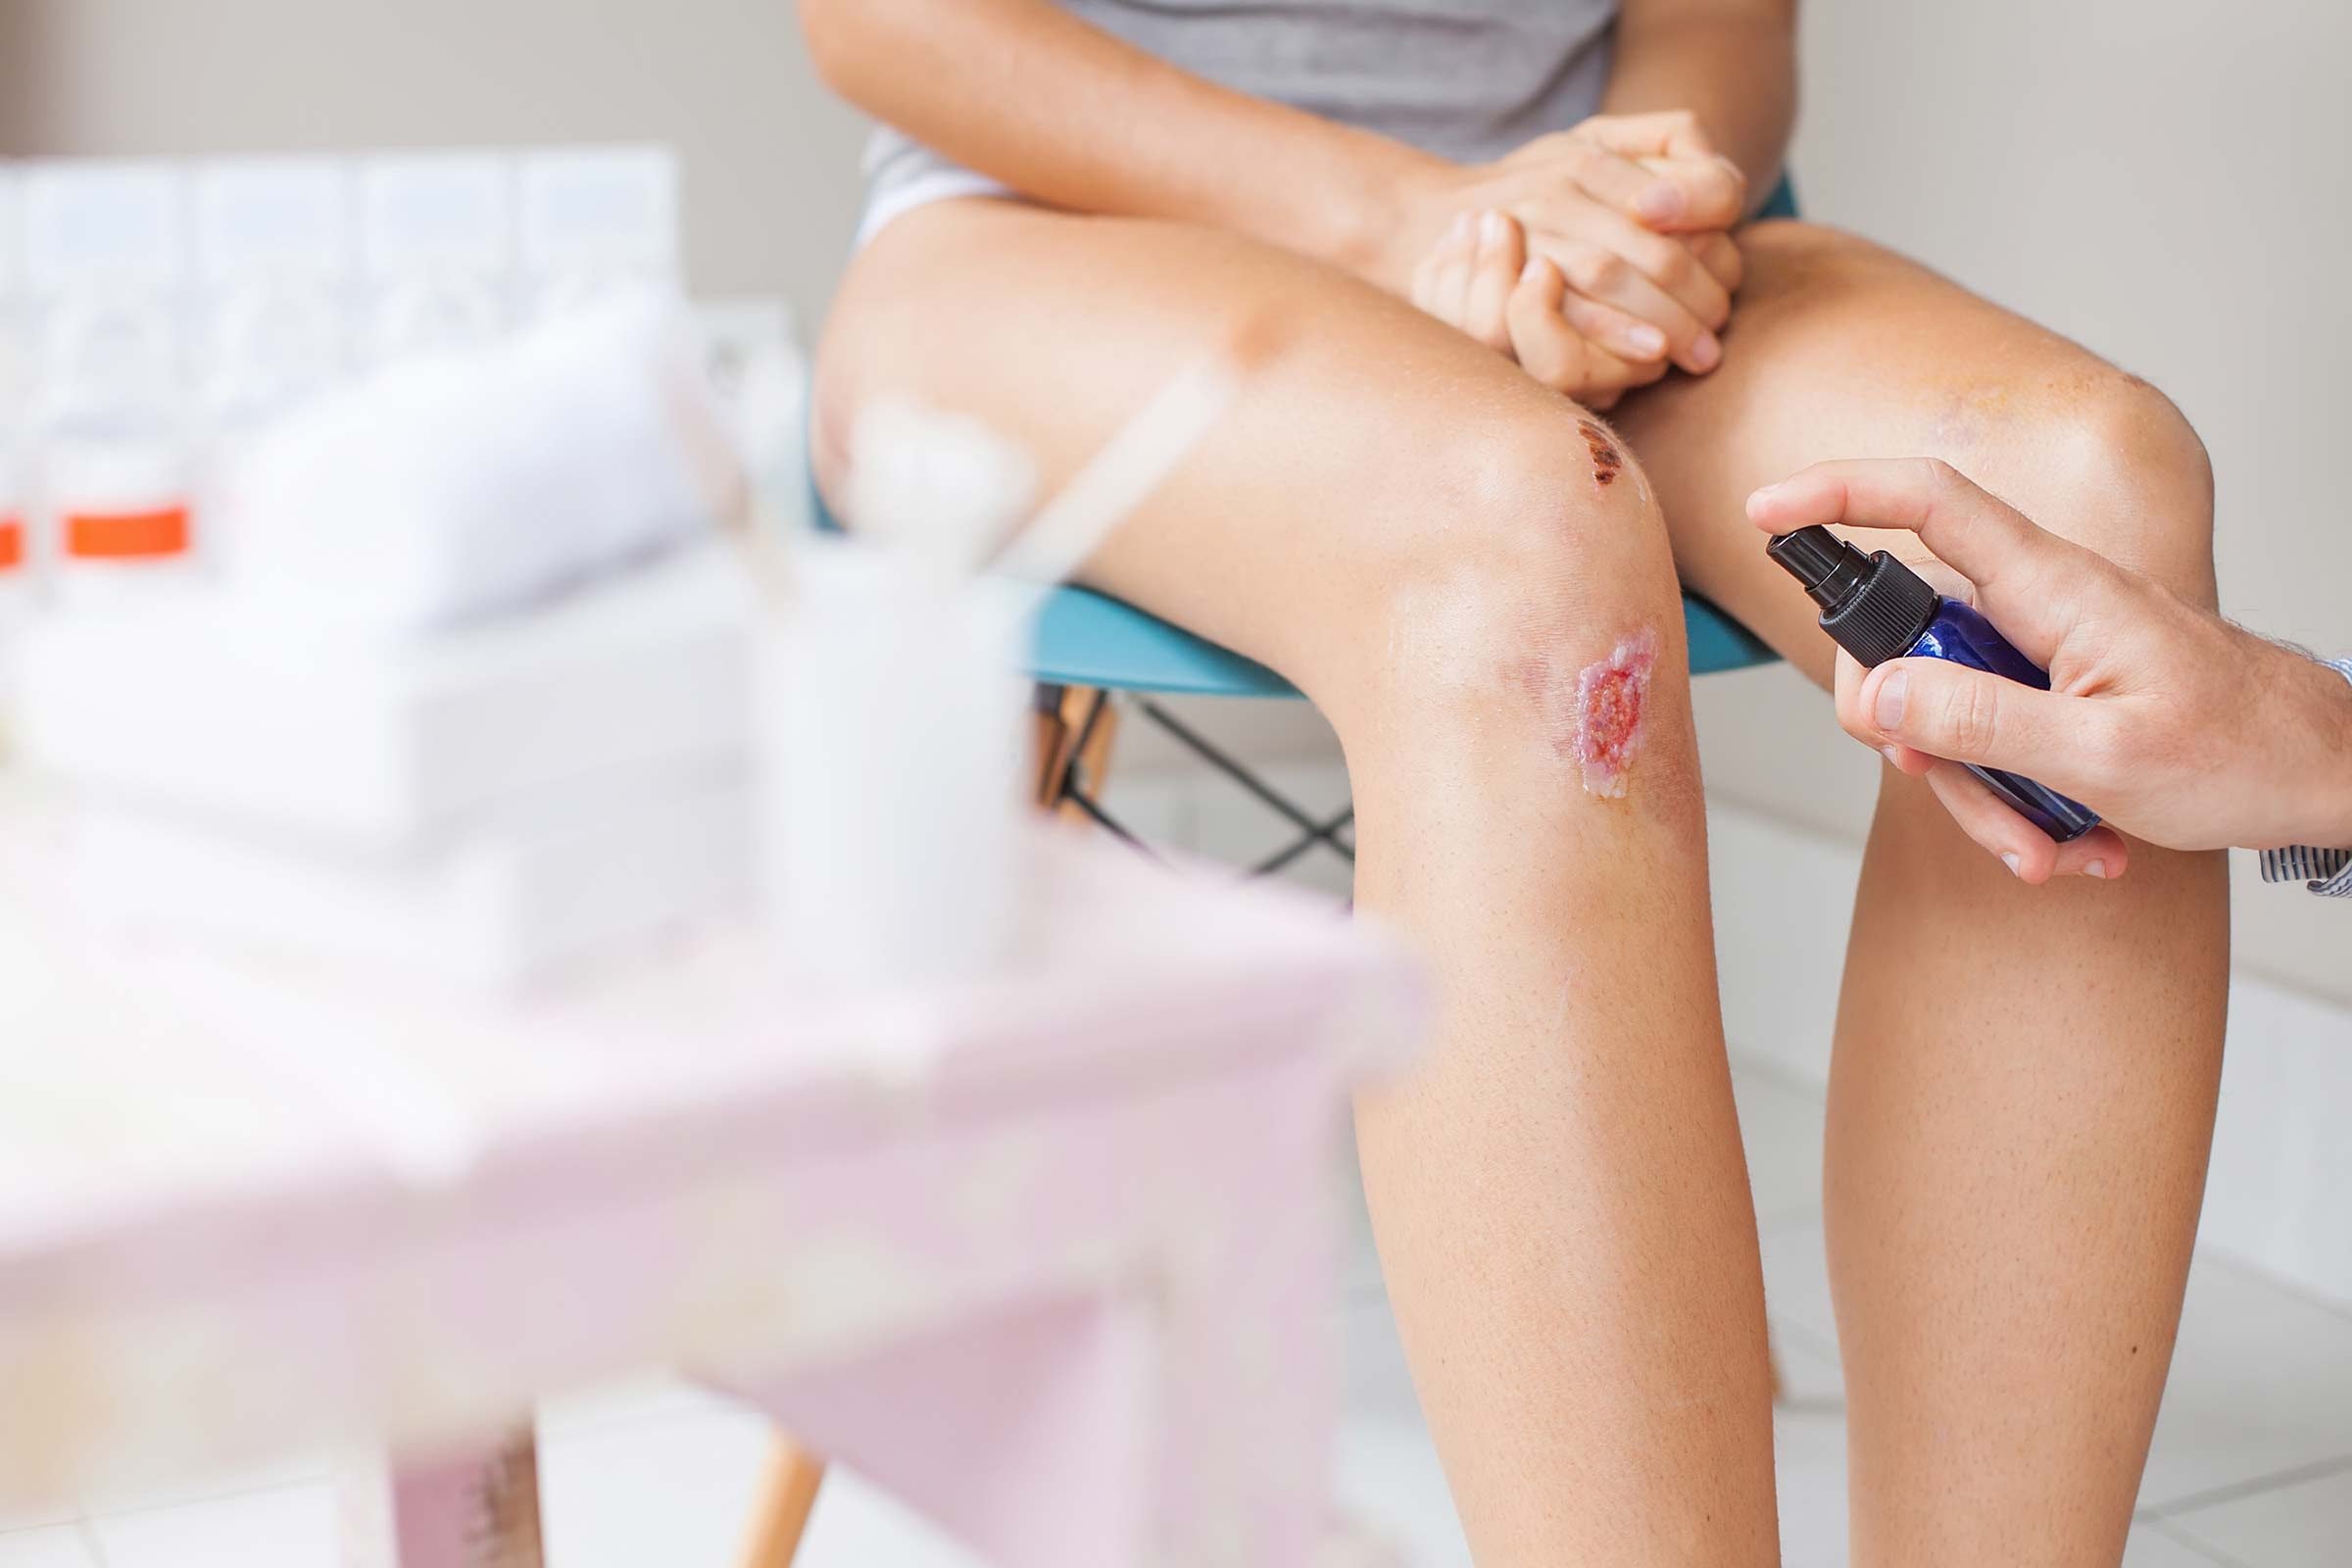 9 Signs of an Infected Cut or Scrape You Should Never Ignore